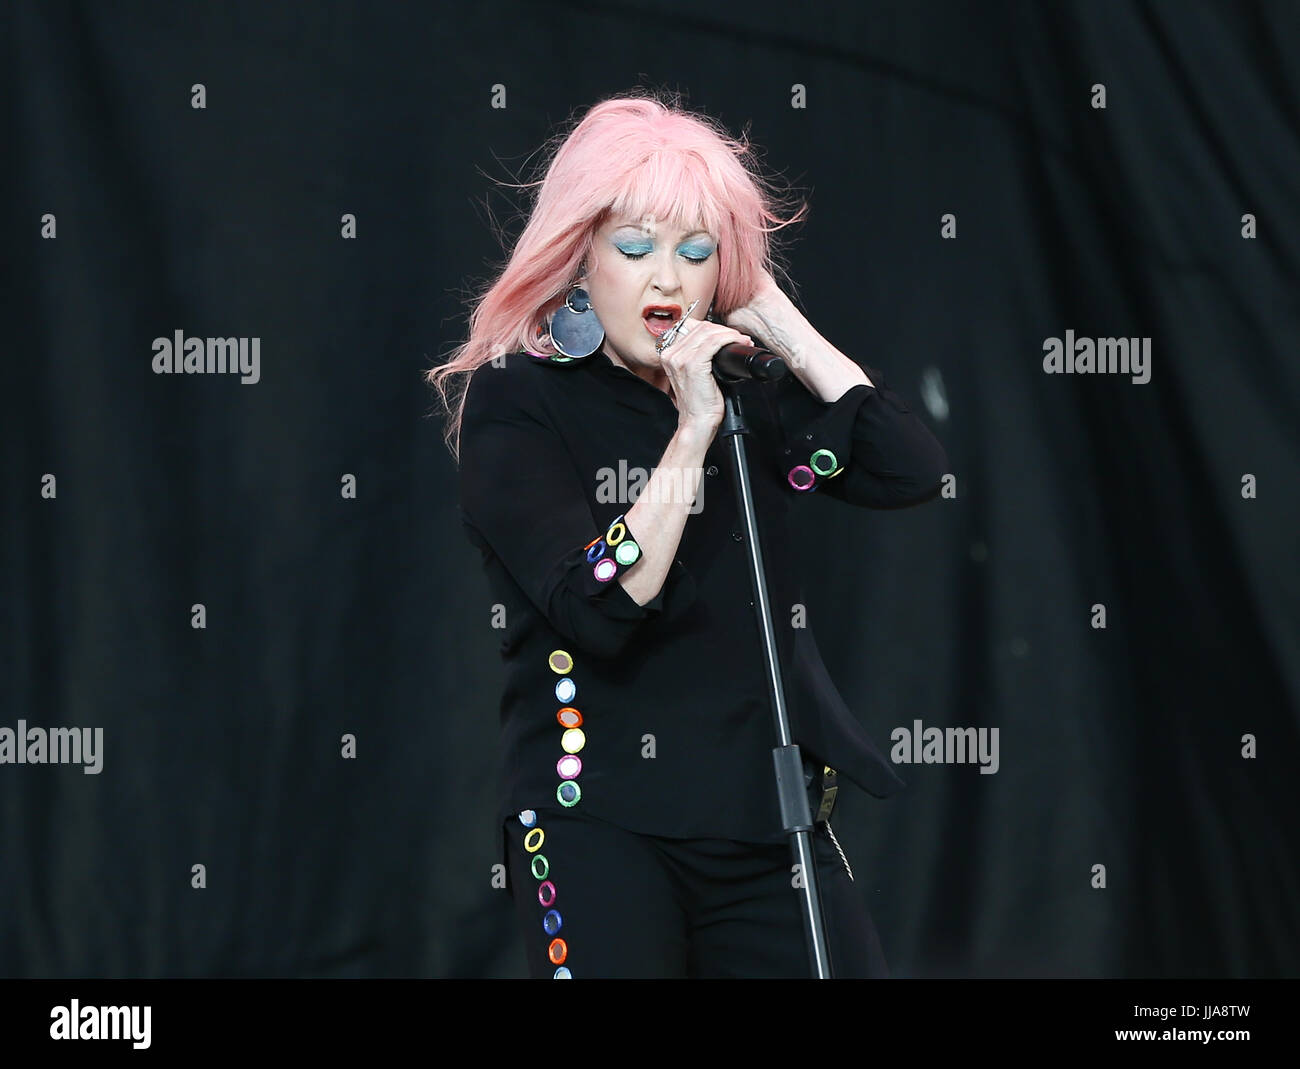 Wantagh, New York, USA. . 18th July, 2017. Singer Cyndi Lauper performs in concert at Northwell Health at Jones Beach Theater on July 18, 2017 in Wantagh, New York. Credit: AKPhoto/Alamy Live News Stock Photo